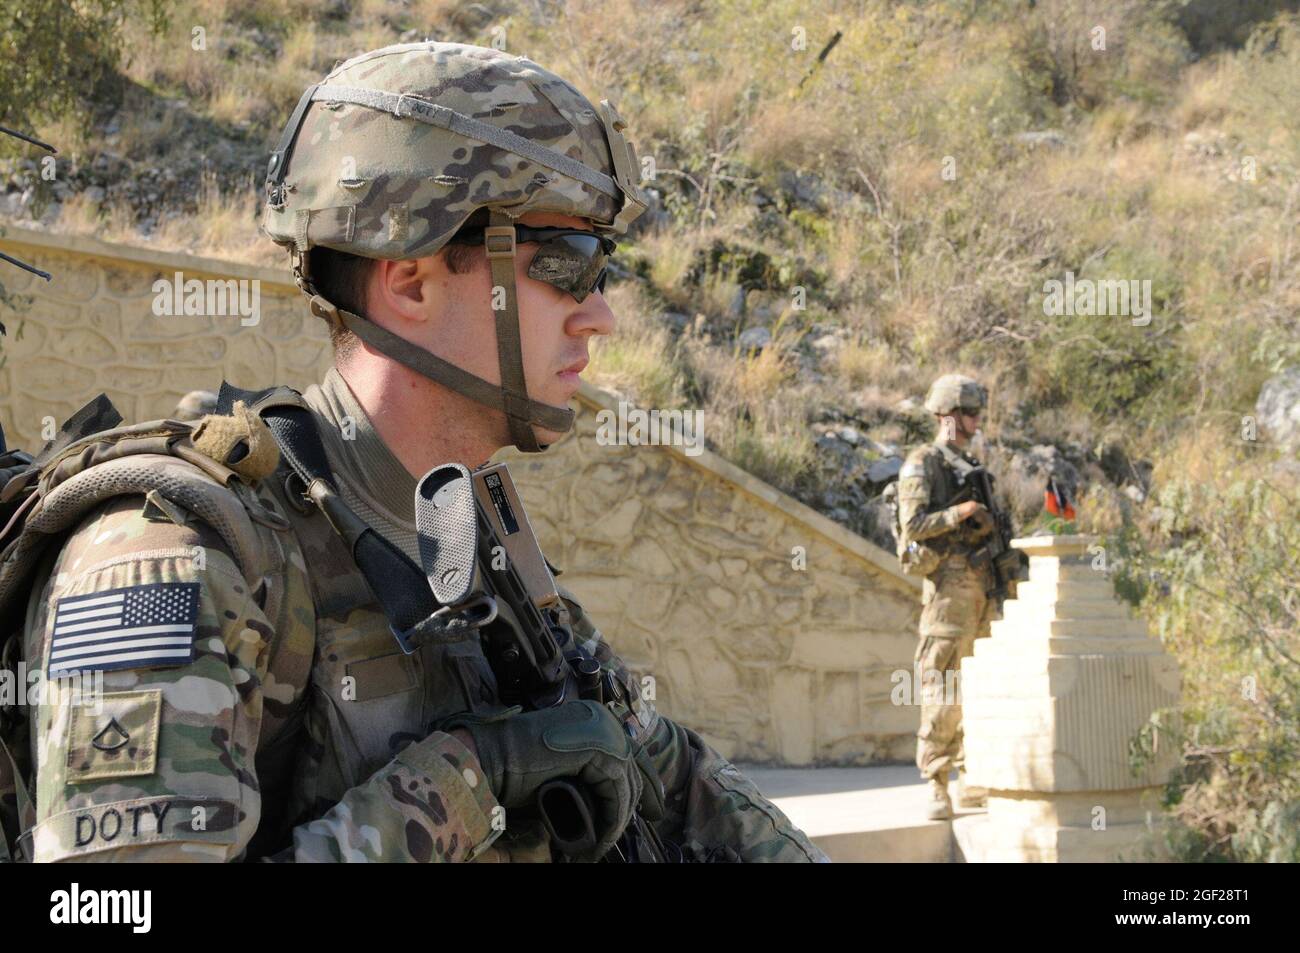 U.S. Army Spc. Andrew Doty (left), of Poquoson, Va., and Spc. Joshua Provo (right) from Festus, Mo., overlook the Afghanistan/Pakistan border at Torkham, Nov. 19, 2013, while their superiors discuss customs and security operations at the border in order to gain a better understanding of how the Afghan Border Police protect their country against illegal immigration and smuggling. Both men serve as infantrymen with Company C, 2nd Battalion, 30th Infantry Regiment, 4th Brigade Combat Team, 10th Mountain Division. (U.S. Army Photo by Sgt. Eric Provost, Task Force Patriot PAO) Stock Photo